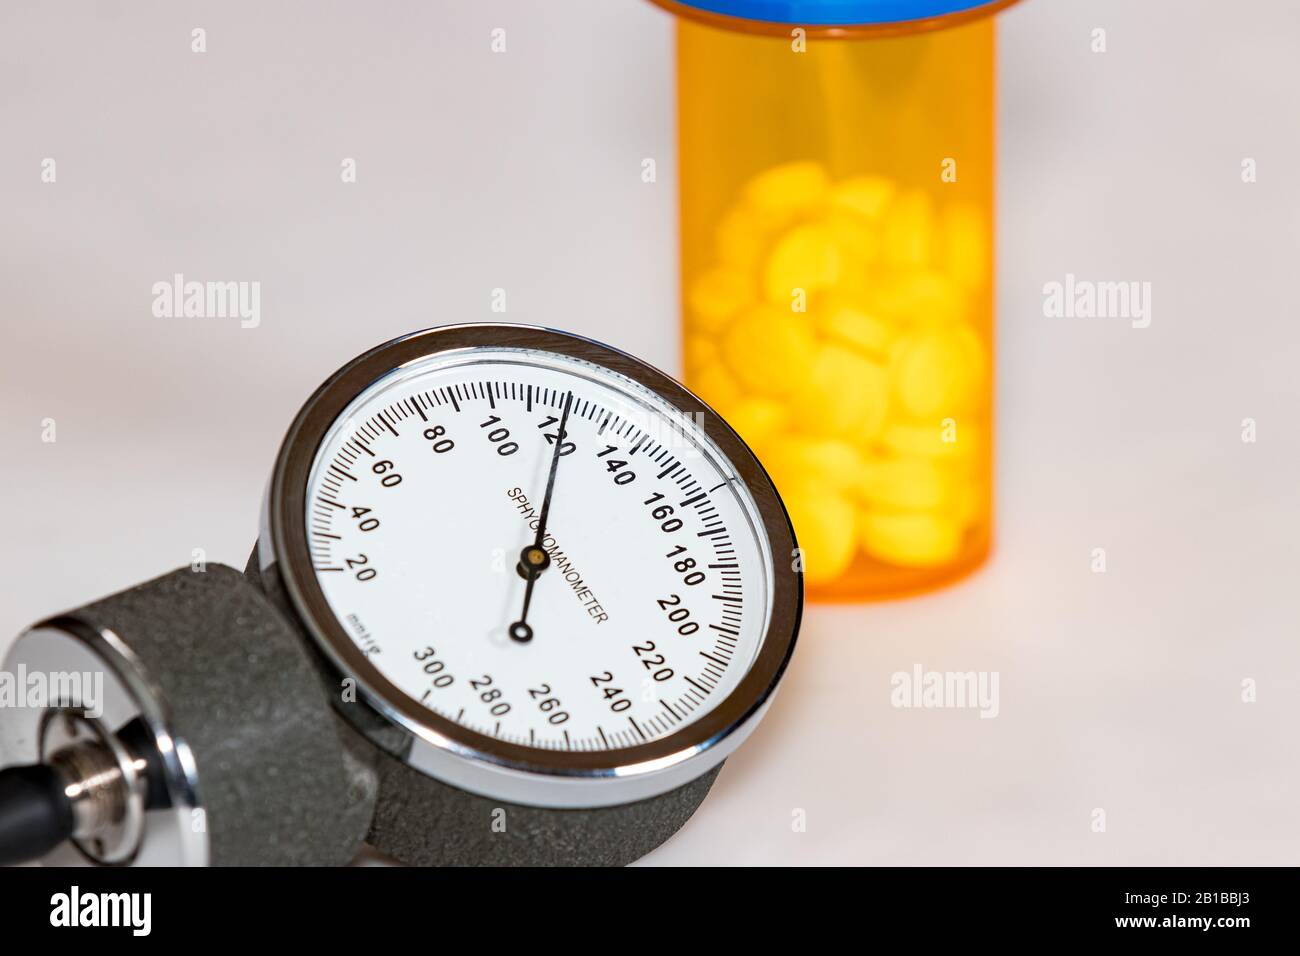 Closeup of blood pressure cuff gauge with normal systolic reading of 120 mmHg. prescription medicine bottle with pills in background Stock Photo